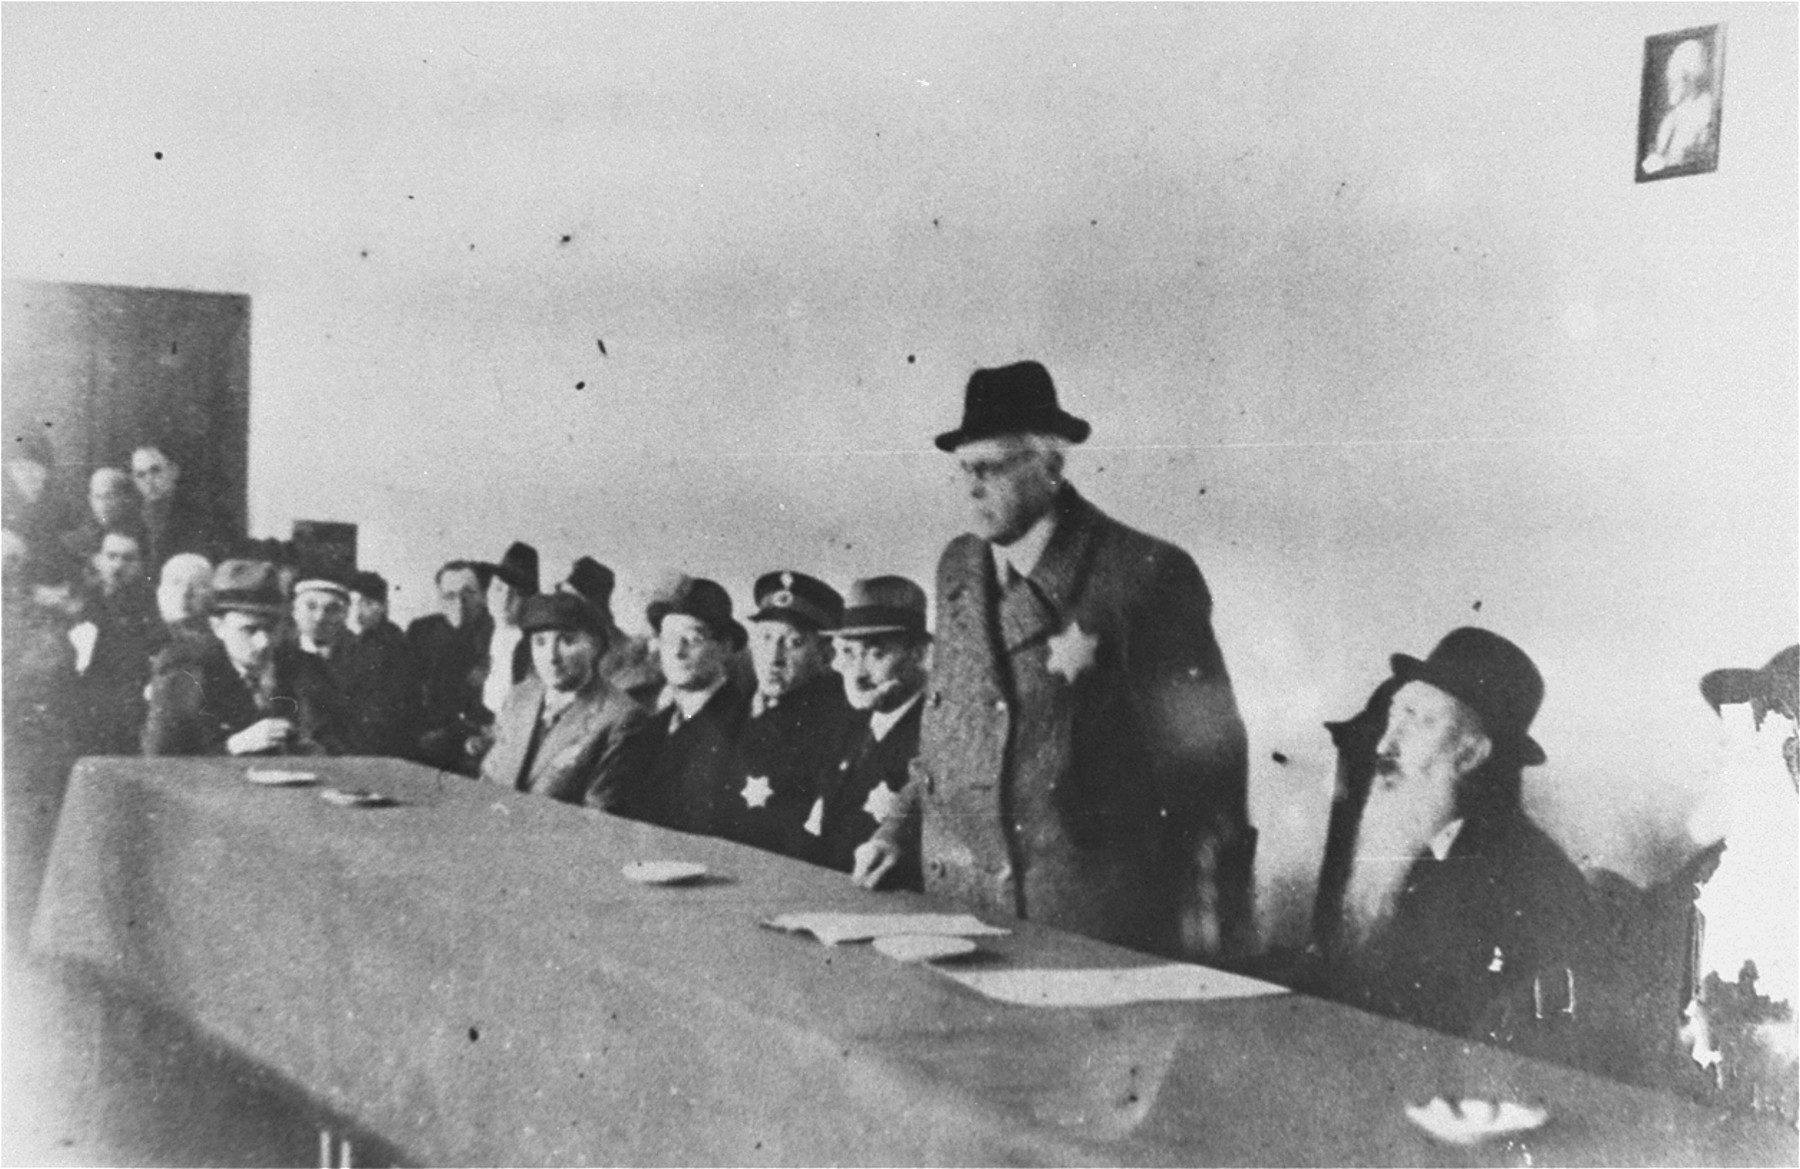 Mordechai Chaim Rumkowski delivers a speech at a meeting of Lodz ghetto officials.  

Among those pictured are: Rabbi Josif Fajner (second from the right), Dr. Leon Szykier (fifth from the right, wearing a uniform cap).